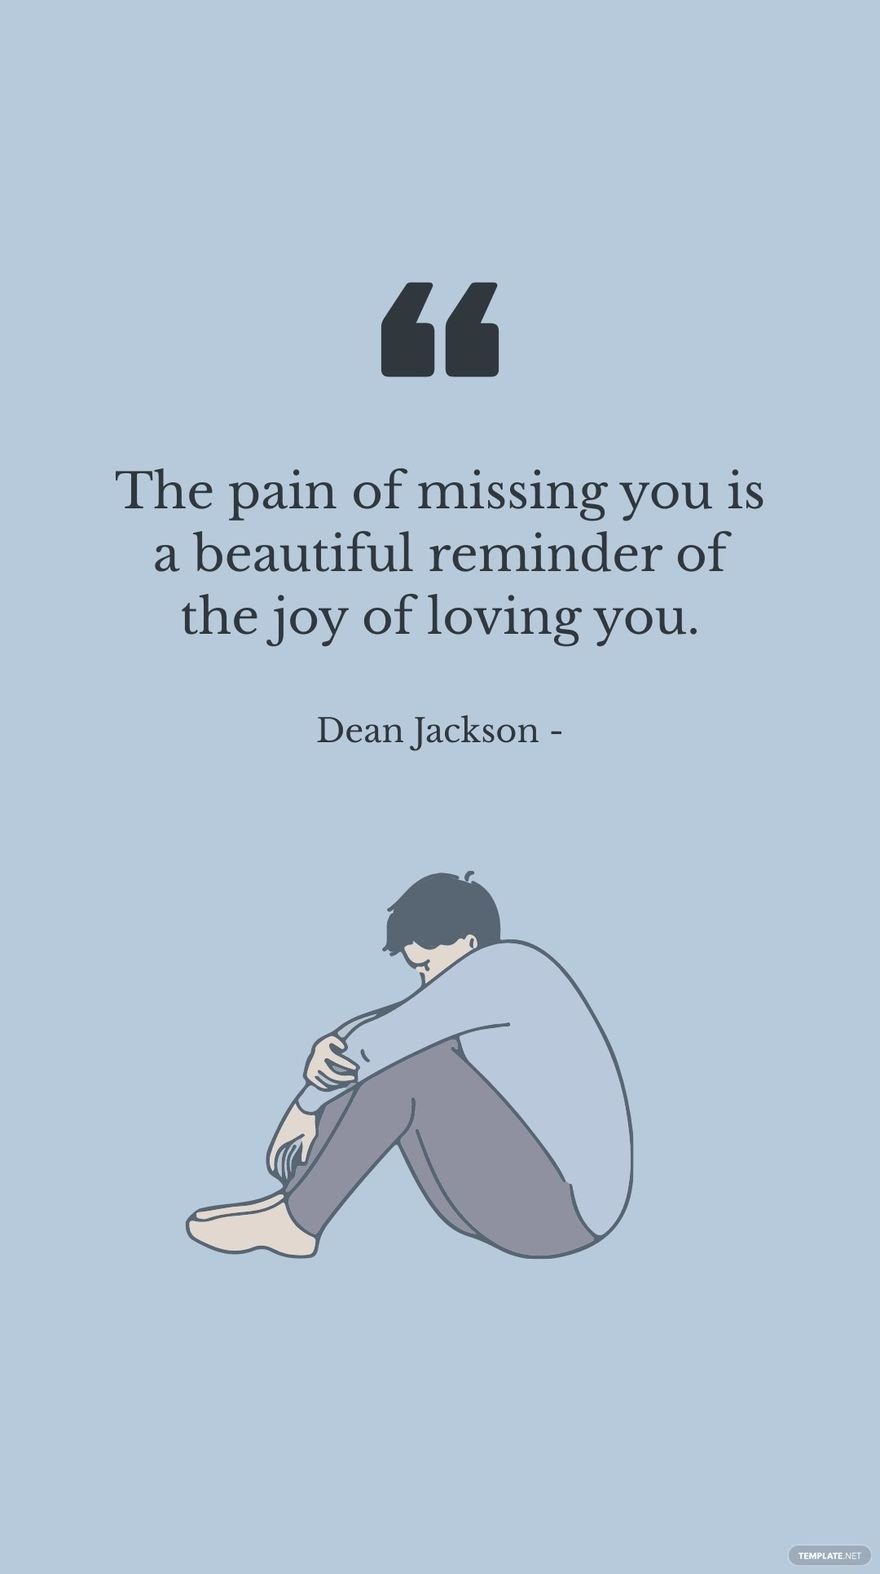 Free Dean Jackson - The pain of missing you is a beautiful reminder of the joy of loving you.